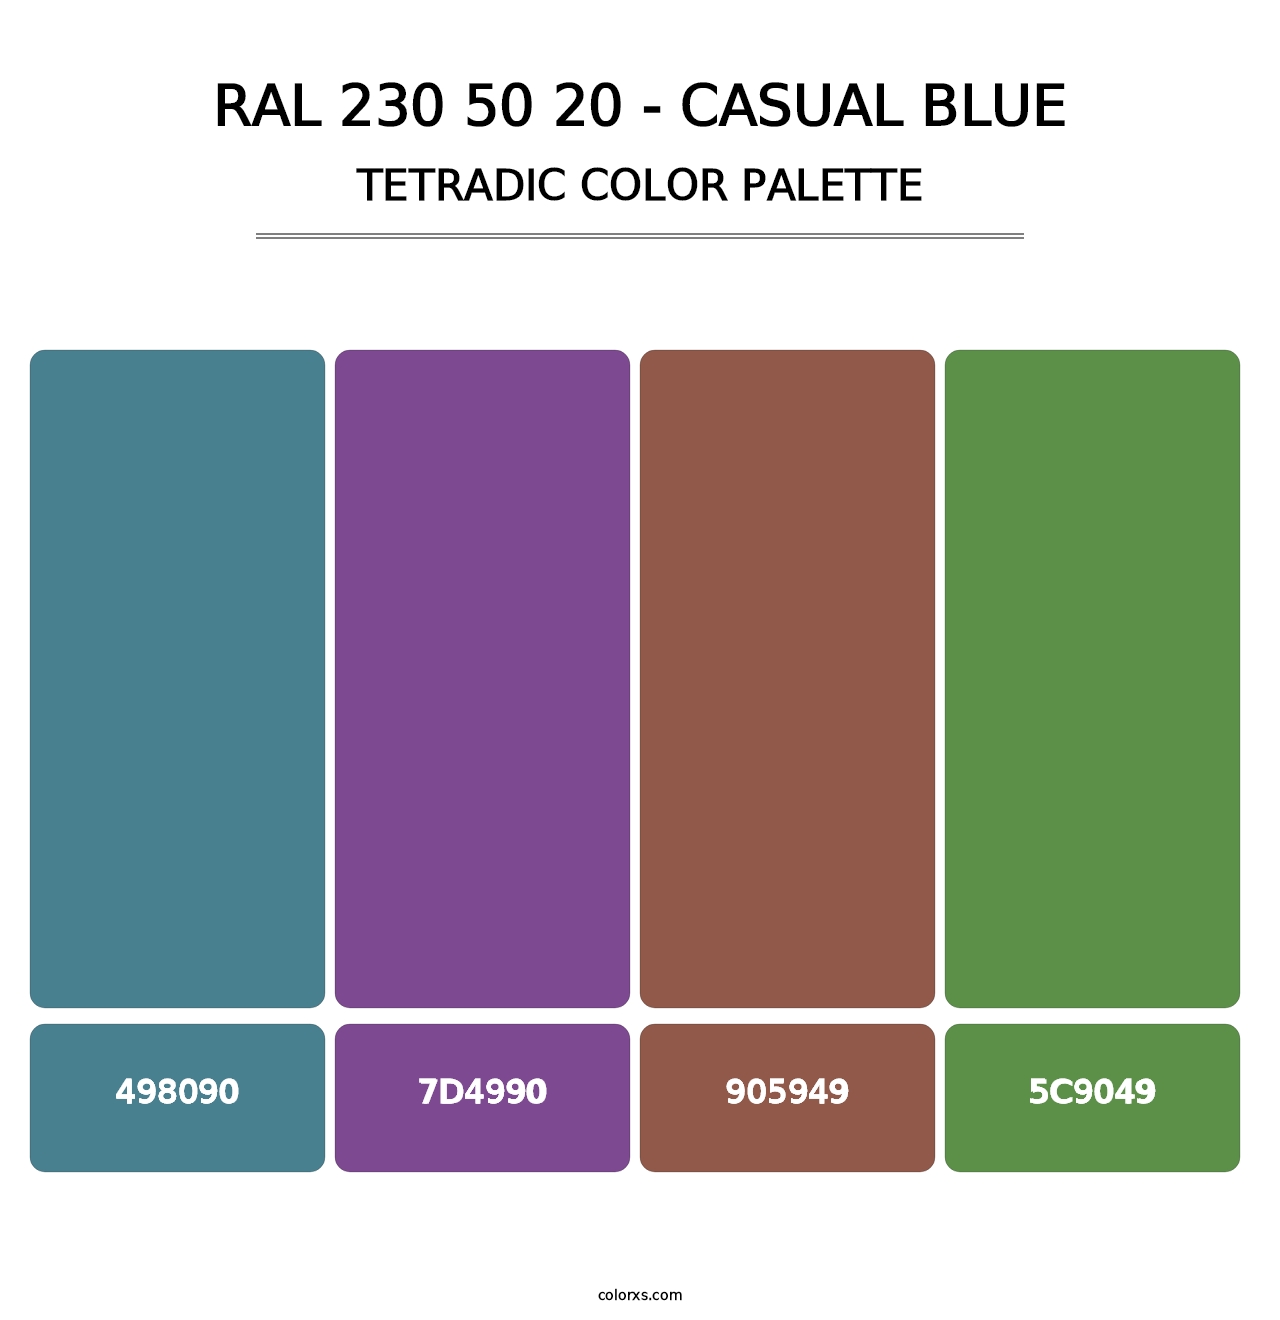 RAL 230 50 20 - Casual Blue - Tetradic Color Palette